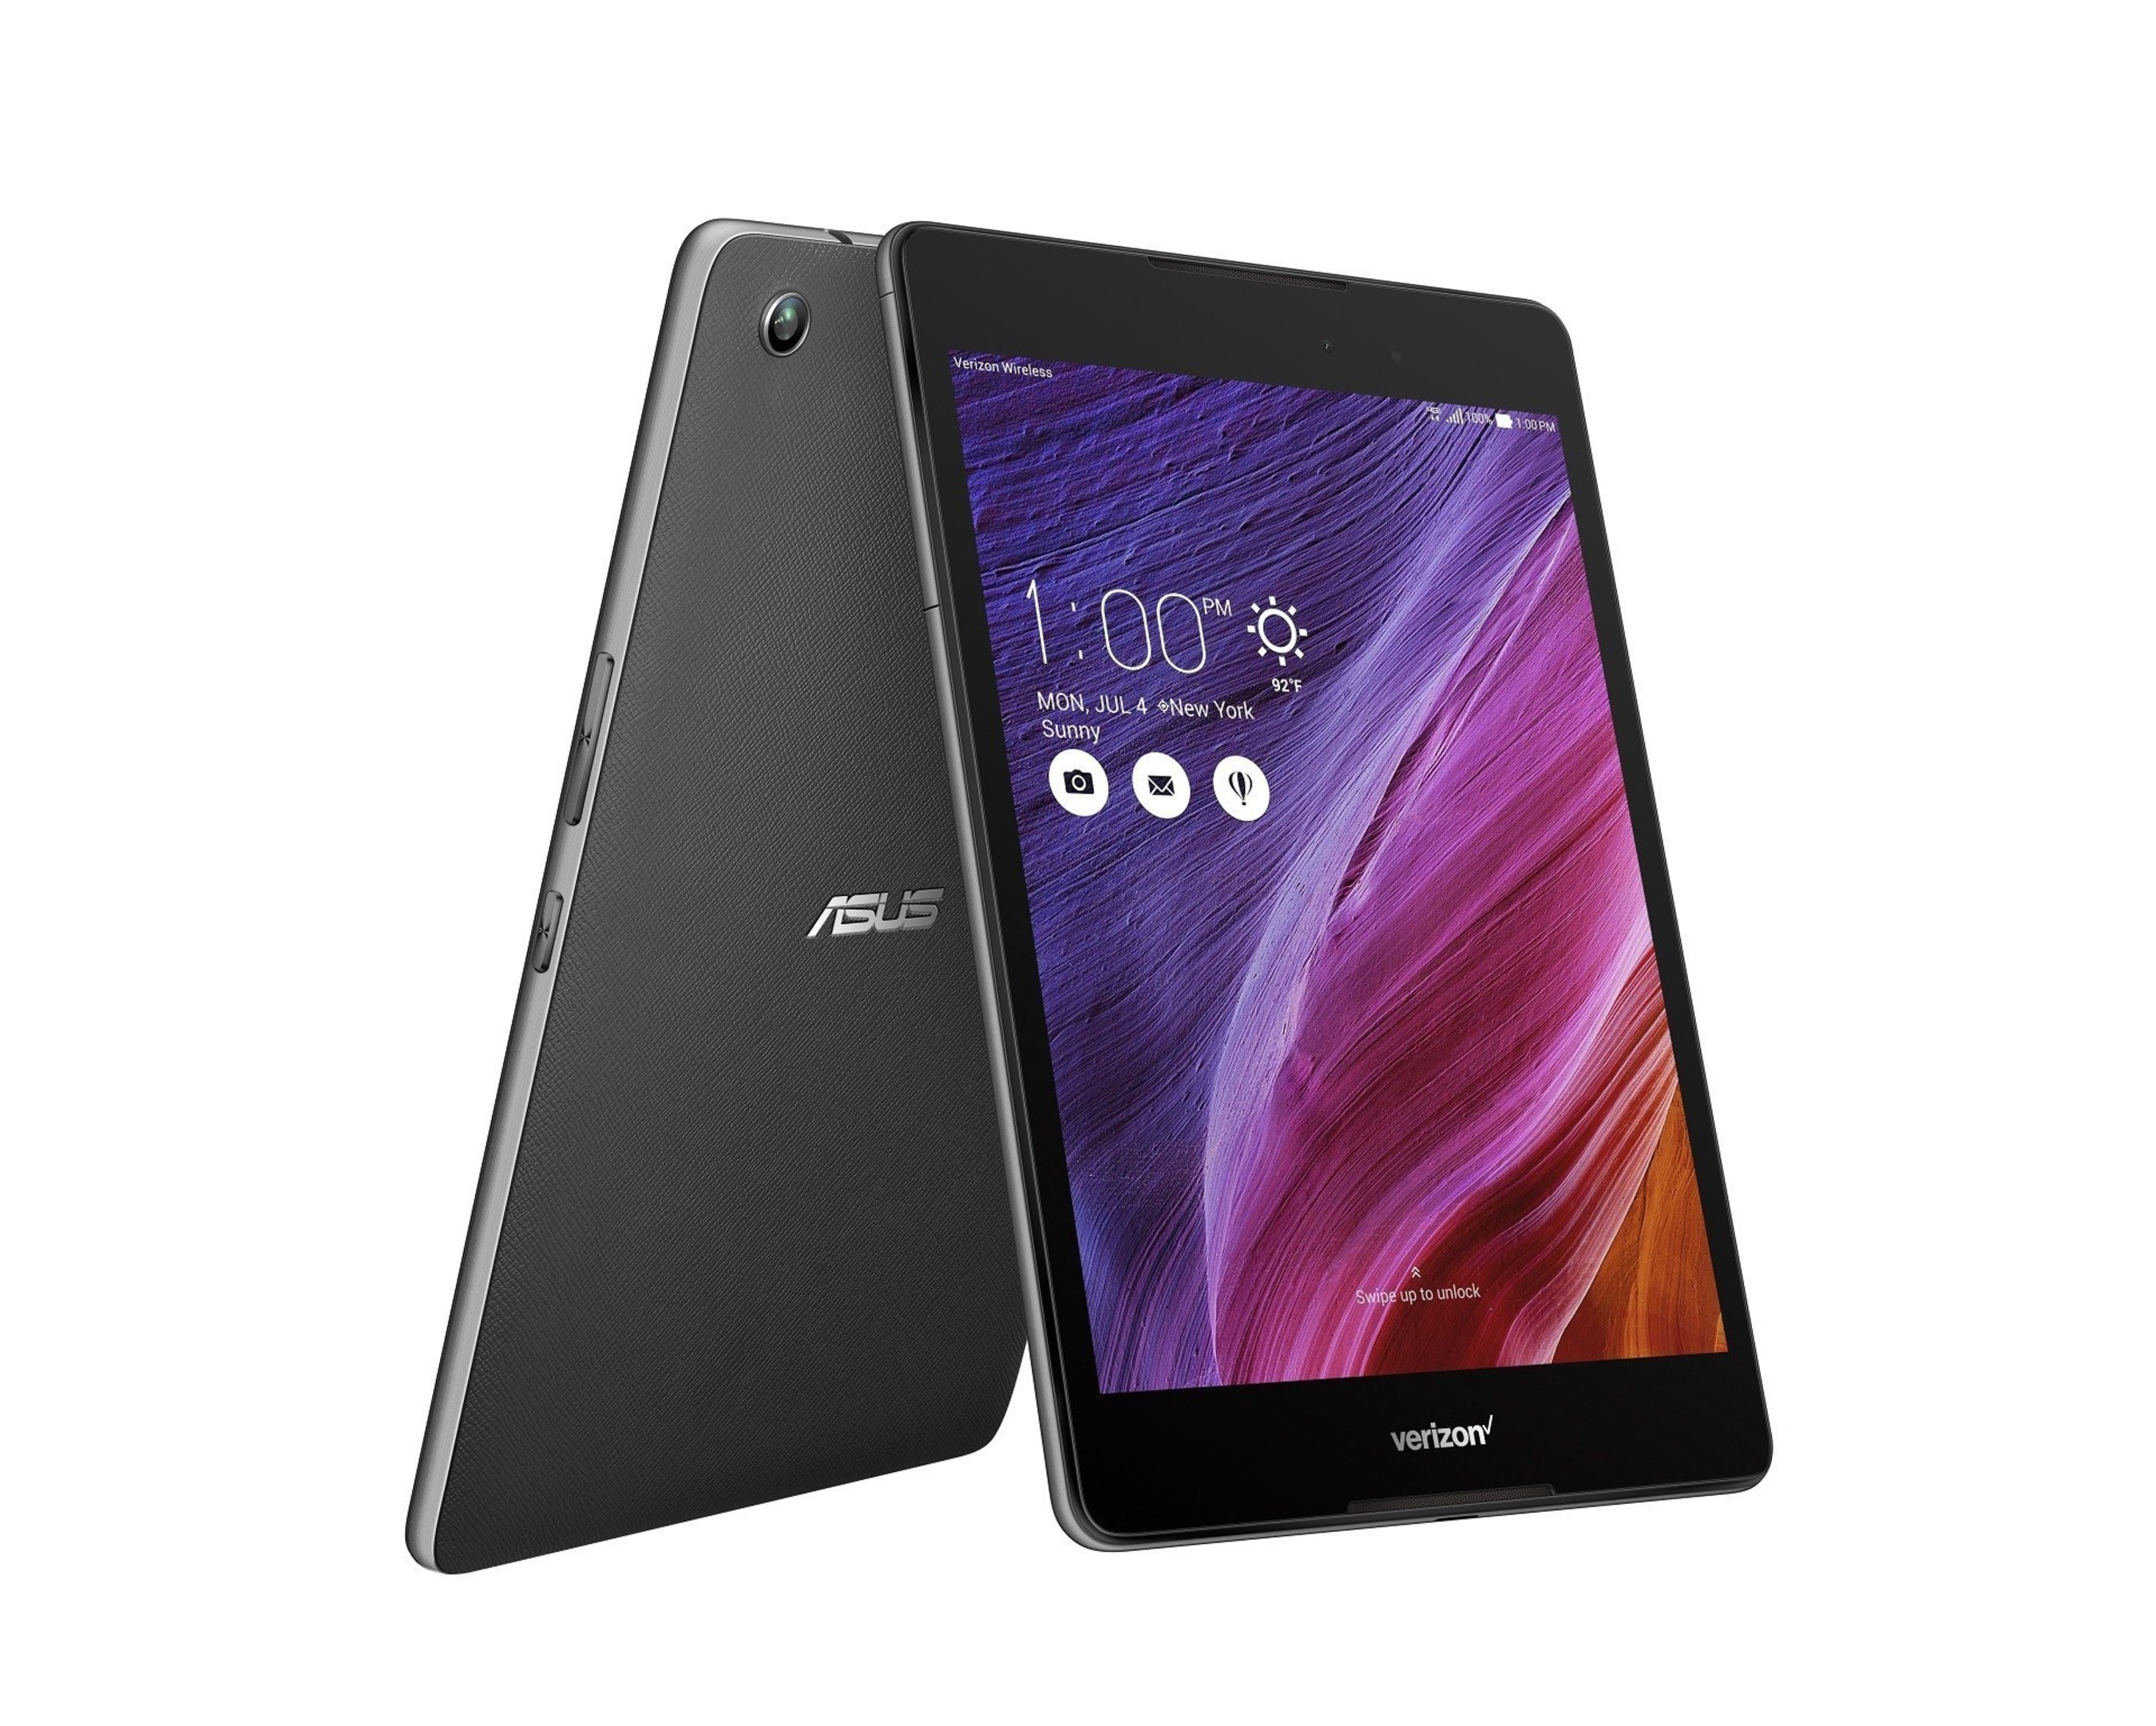 ASUS, Verizon and Qualcomm Technologies, Inc., a subsidiary of Qualcomm Incorporated, today announced that the ASUS ZenPad Z8 tablet, a multimedia powerhouse featuring the Qualcomm(R) Snapdragon(TM) 650 hexa-core processor, is immediately available on America's best network for pre-order exclusively at Verizon at www.verizonwireless.com/tablets/asus-zenpad-z8 and in Verizon retail stores beginning Thursday, June 23. The ASUS ZenPad Z8 is the ultimate entertainment device for watching movies, TV shows,...